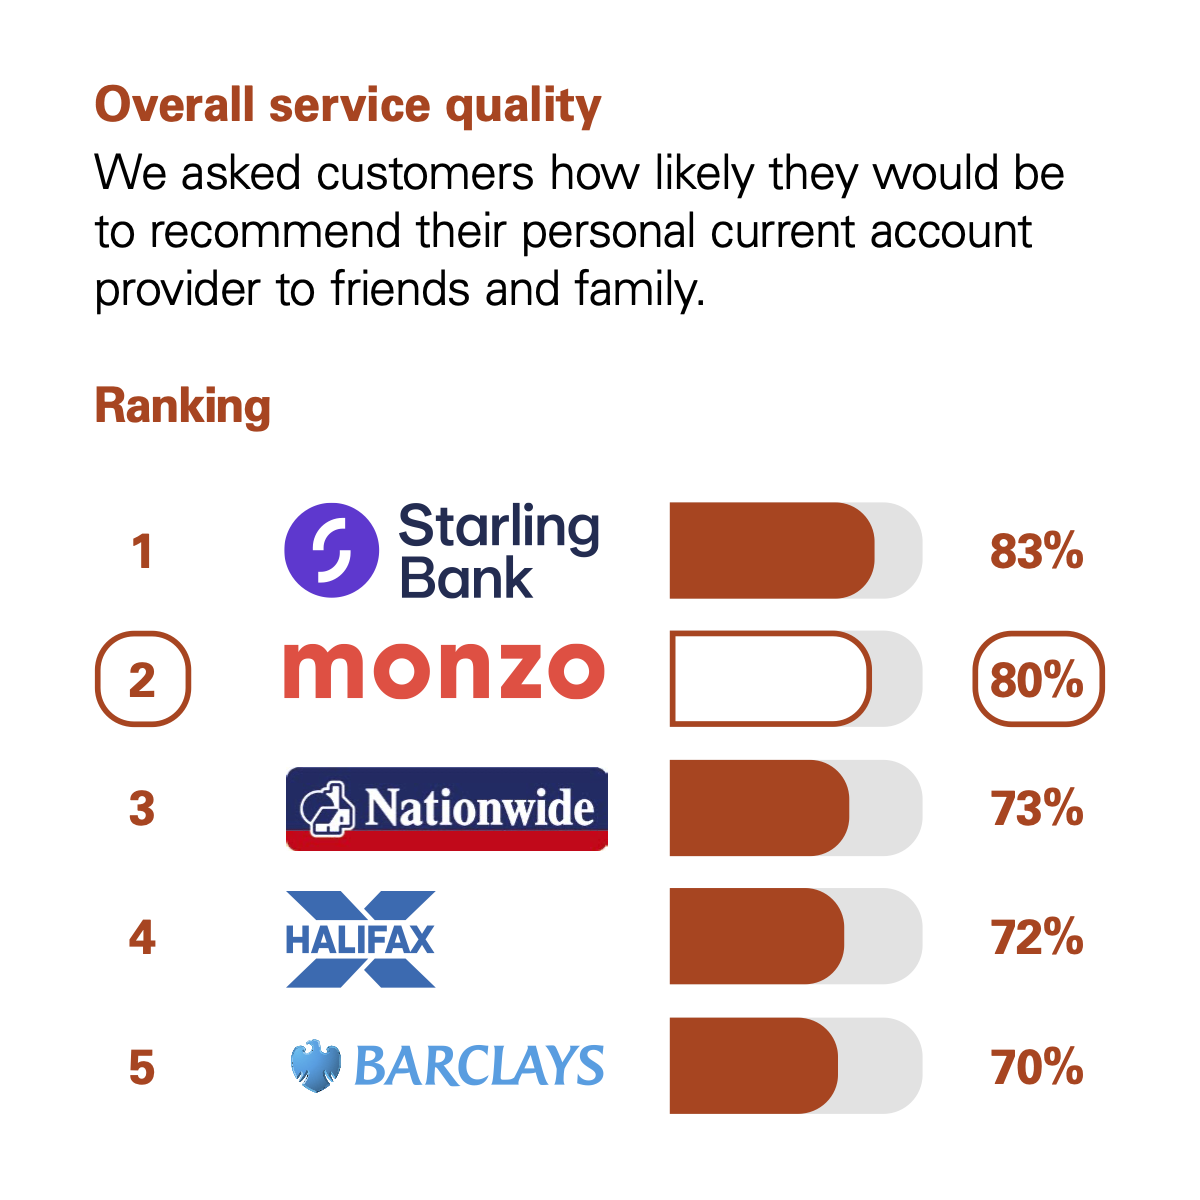 Graph showing the results of the CMA scoring of UK banks in the Overall Service Quality category. The CMA asked customers how likely they would be to recommend their personal current account provider to friends and family. The rankings with percentage scores are: 1st Starling Bank with 83%. 2nd Monzo with 80%. 3rd Nationwide with 73%. 4th Halifax with 72%. 5th Barclays with 70%.